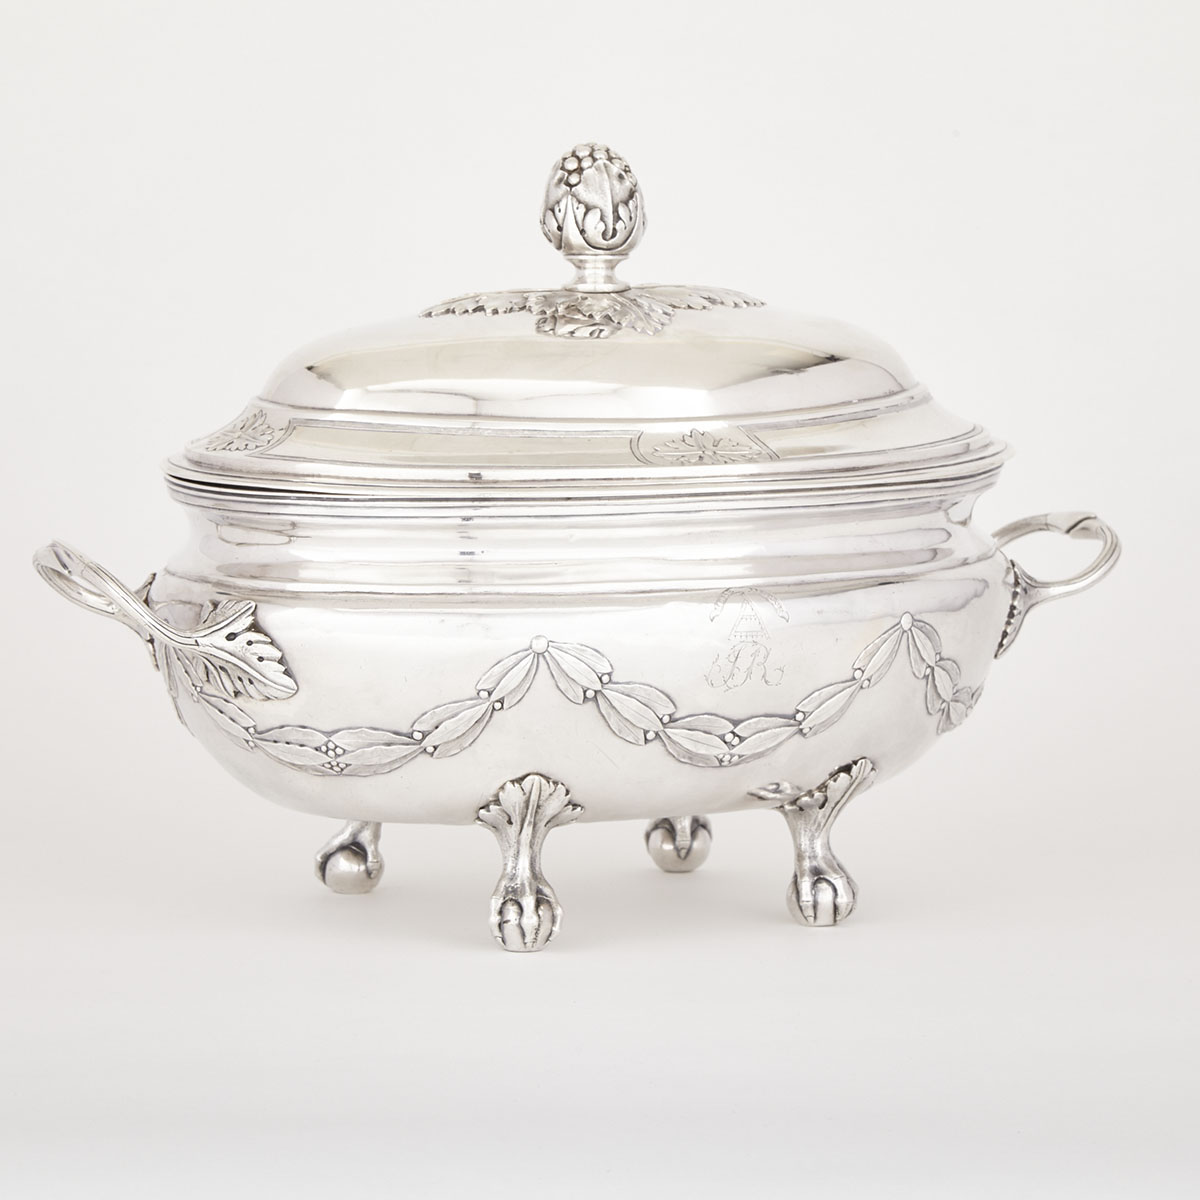 Canadian Silver Covered Soup Tureen, Laurent Amiot, Quebec City, c.1790